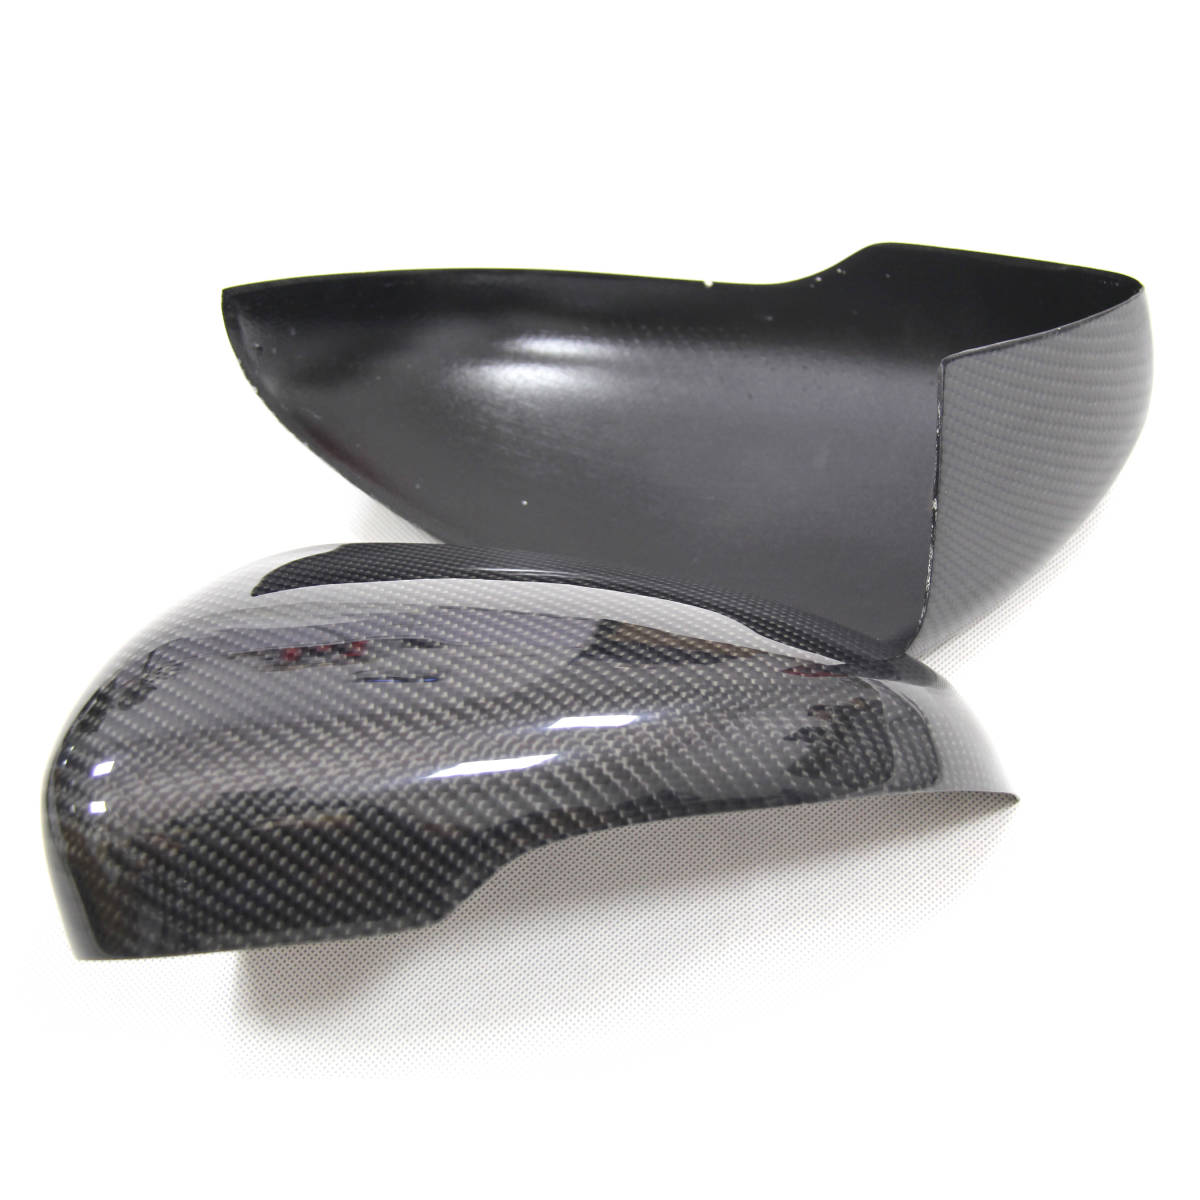 VW Volkswagen Golf 6 GOLF6 MK6 GTI carbon made cohesion type mirror cover 